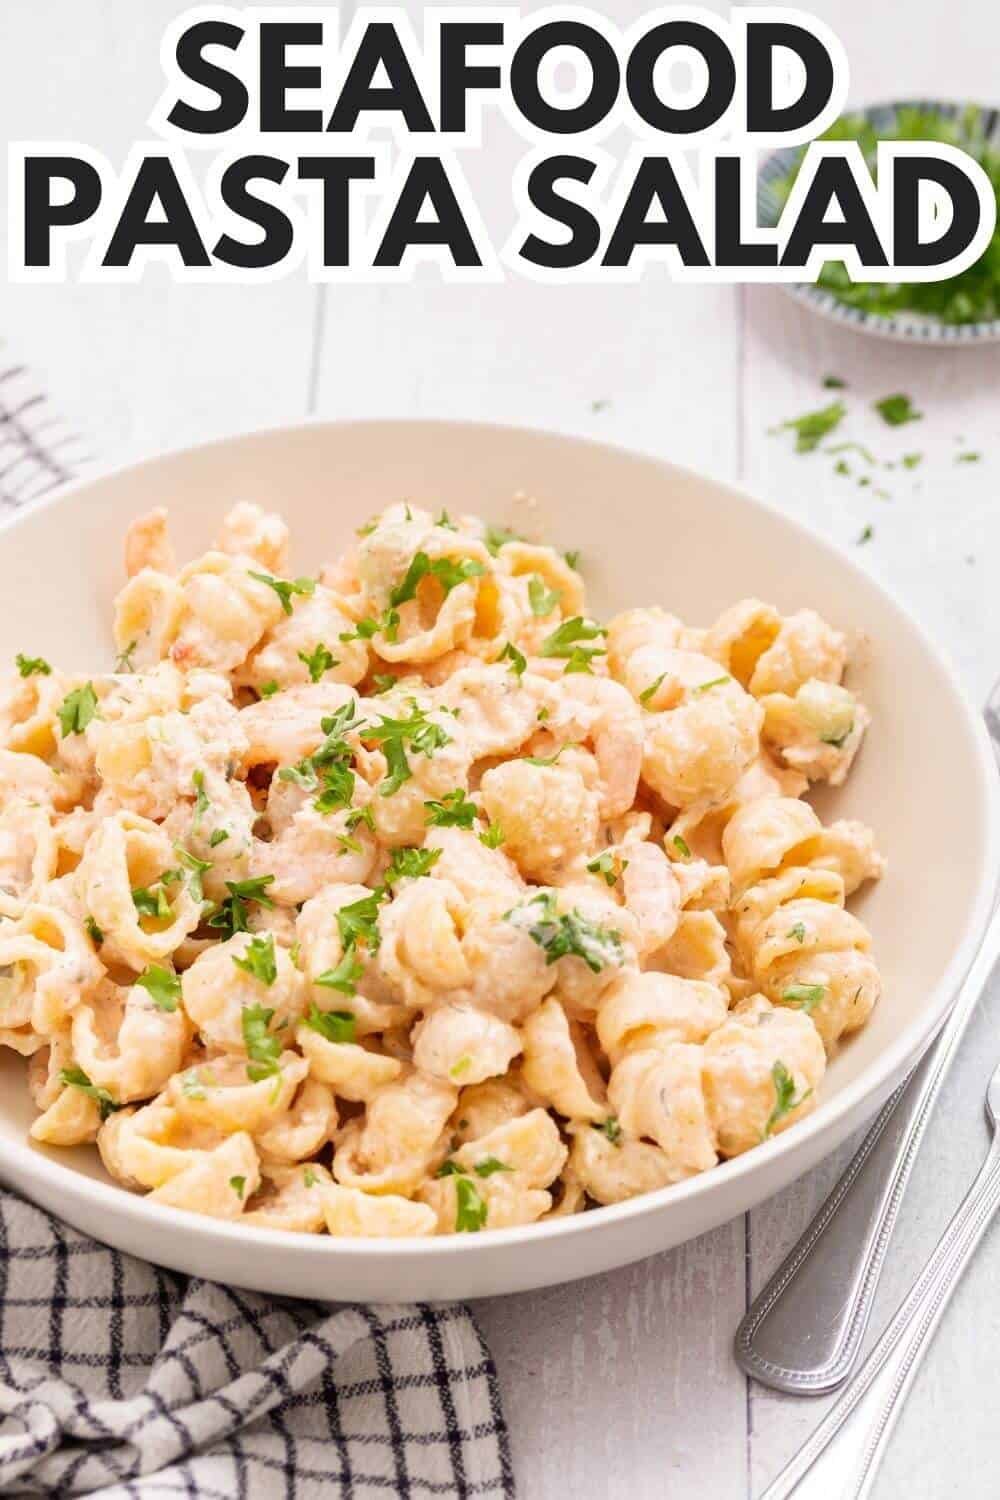 Seafood pasta salad with recipe title text overlay.